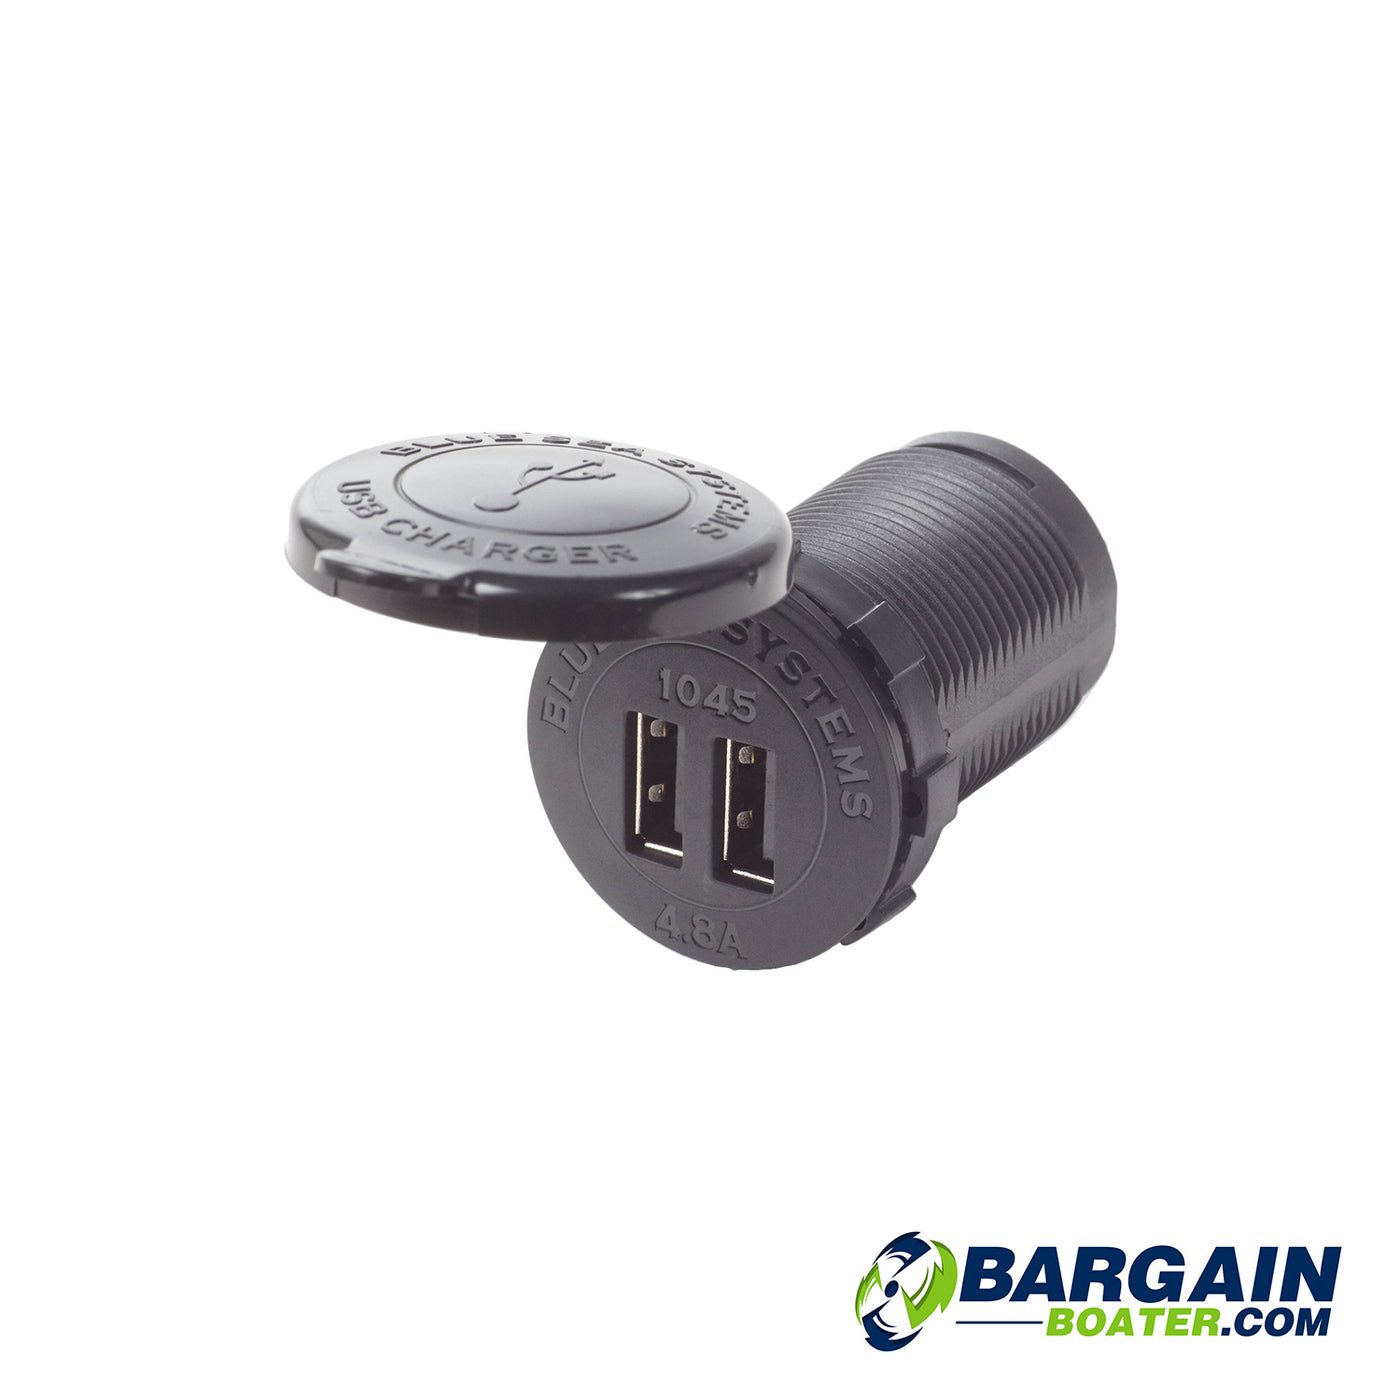 Blue Sea Systems Fast Charge 4.8A Dual USB Chargers